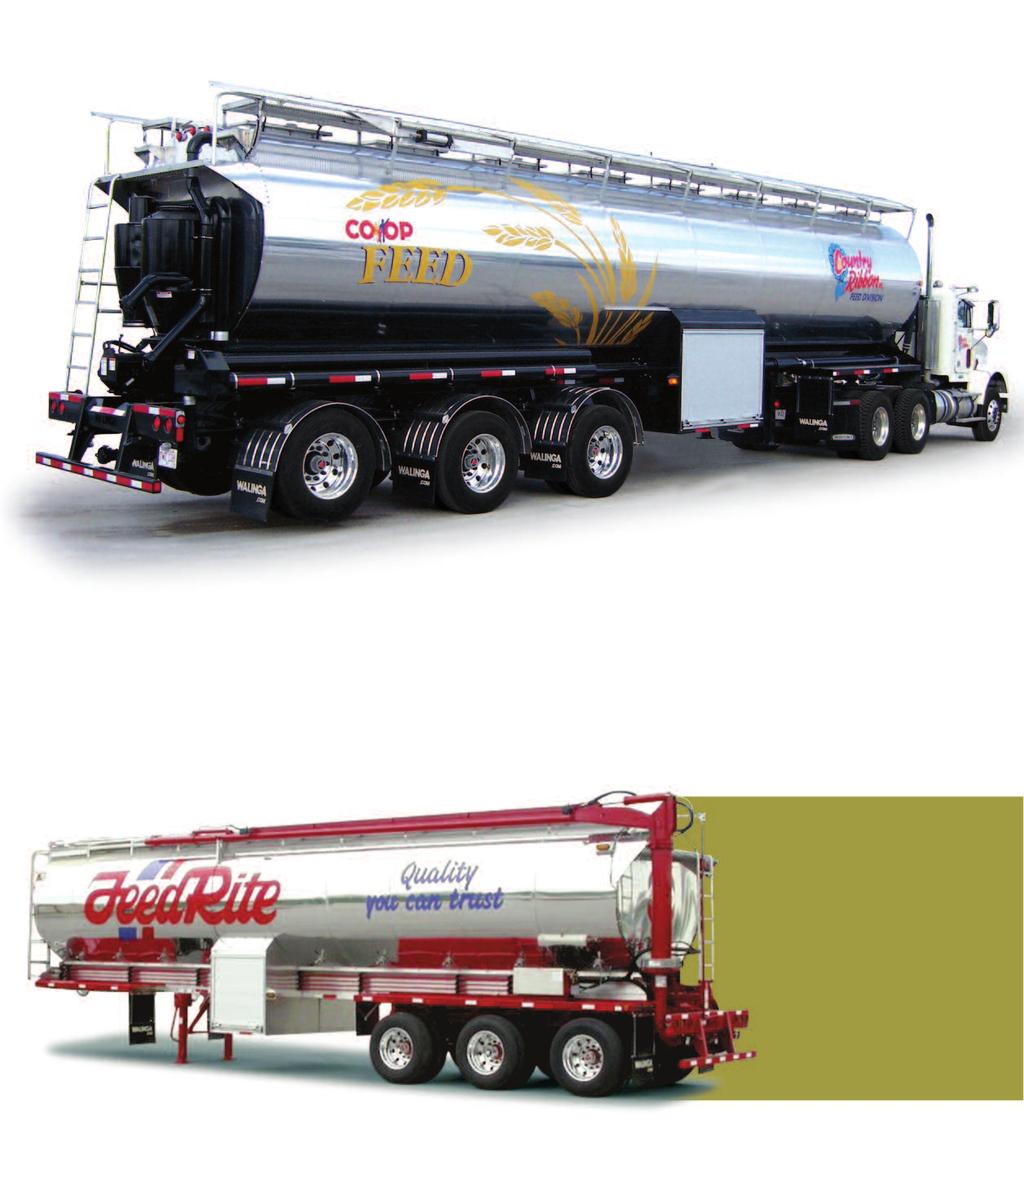 P N E U M A T I C D I S C H A R G E The WALINGA PNEUMATIC DISCHARGE system is available on both truck mounted and semitrailer Hopper Tanks.